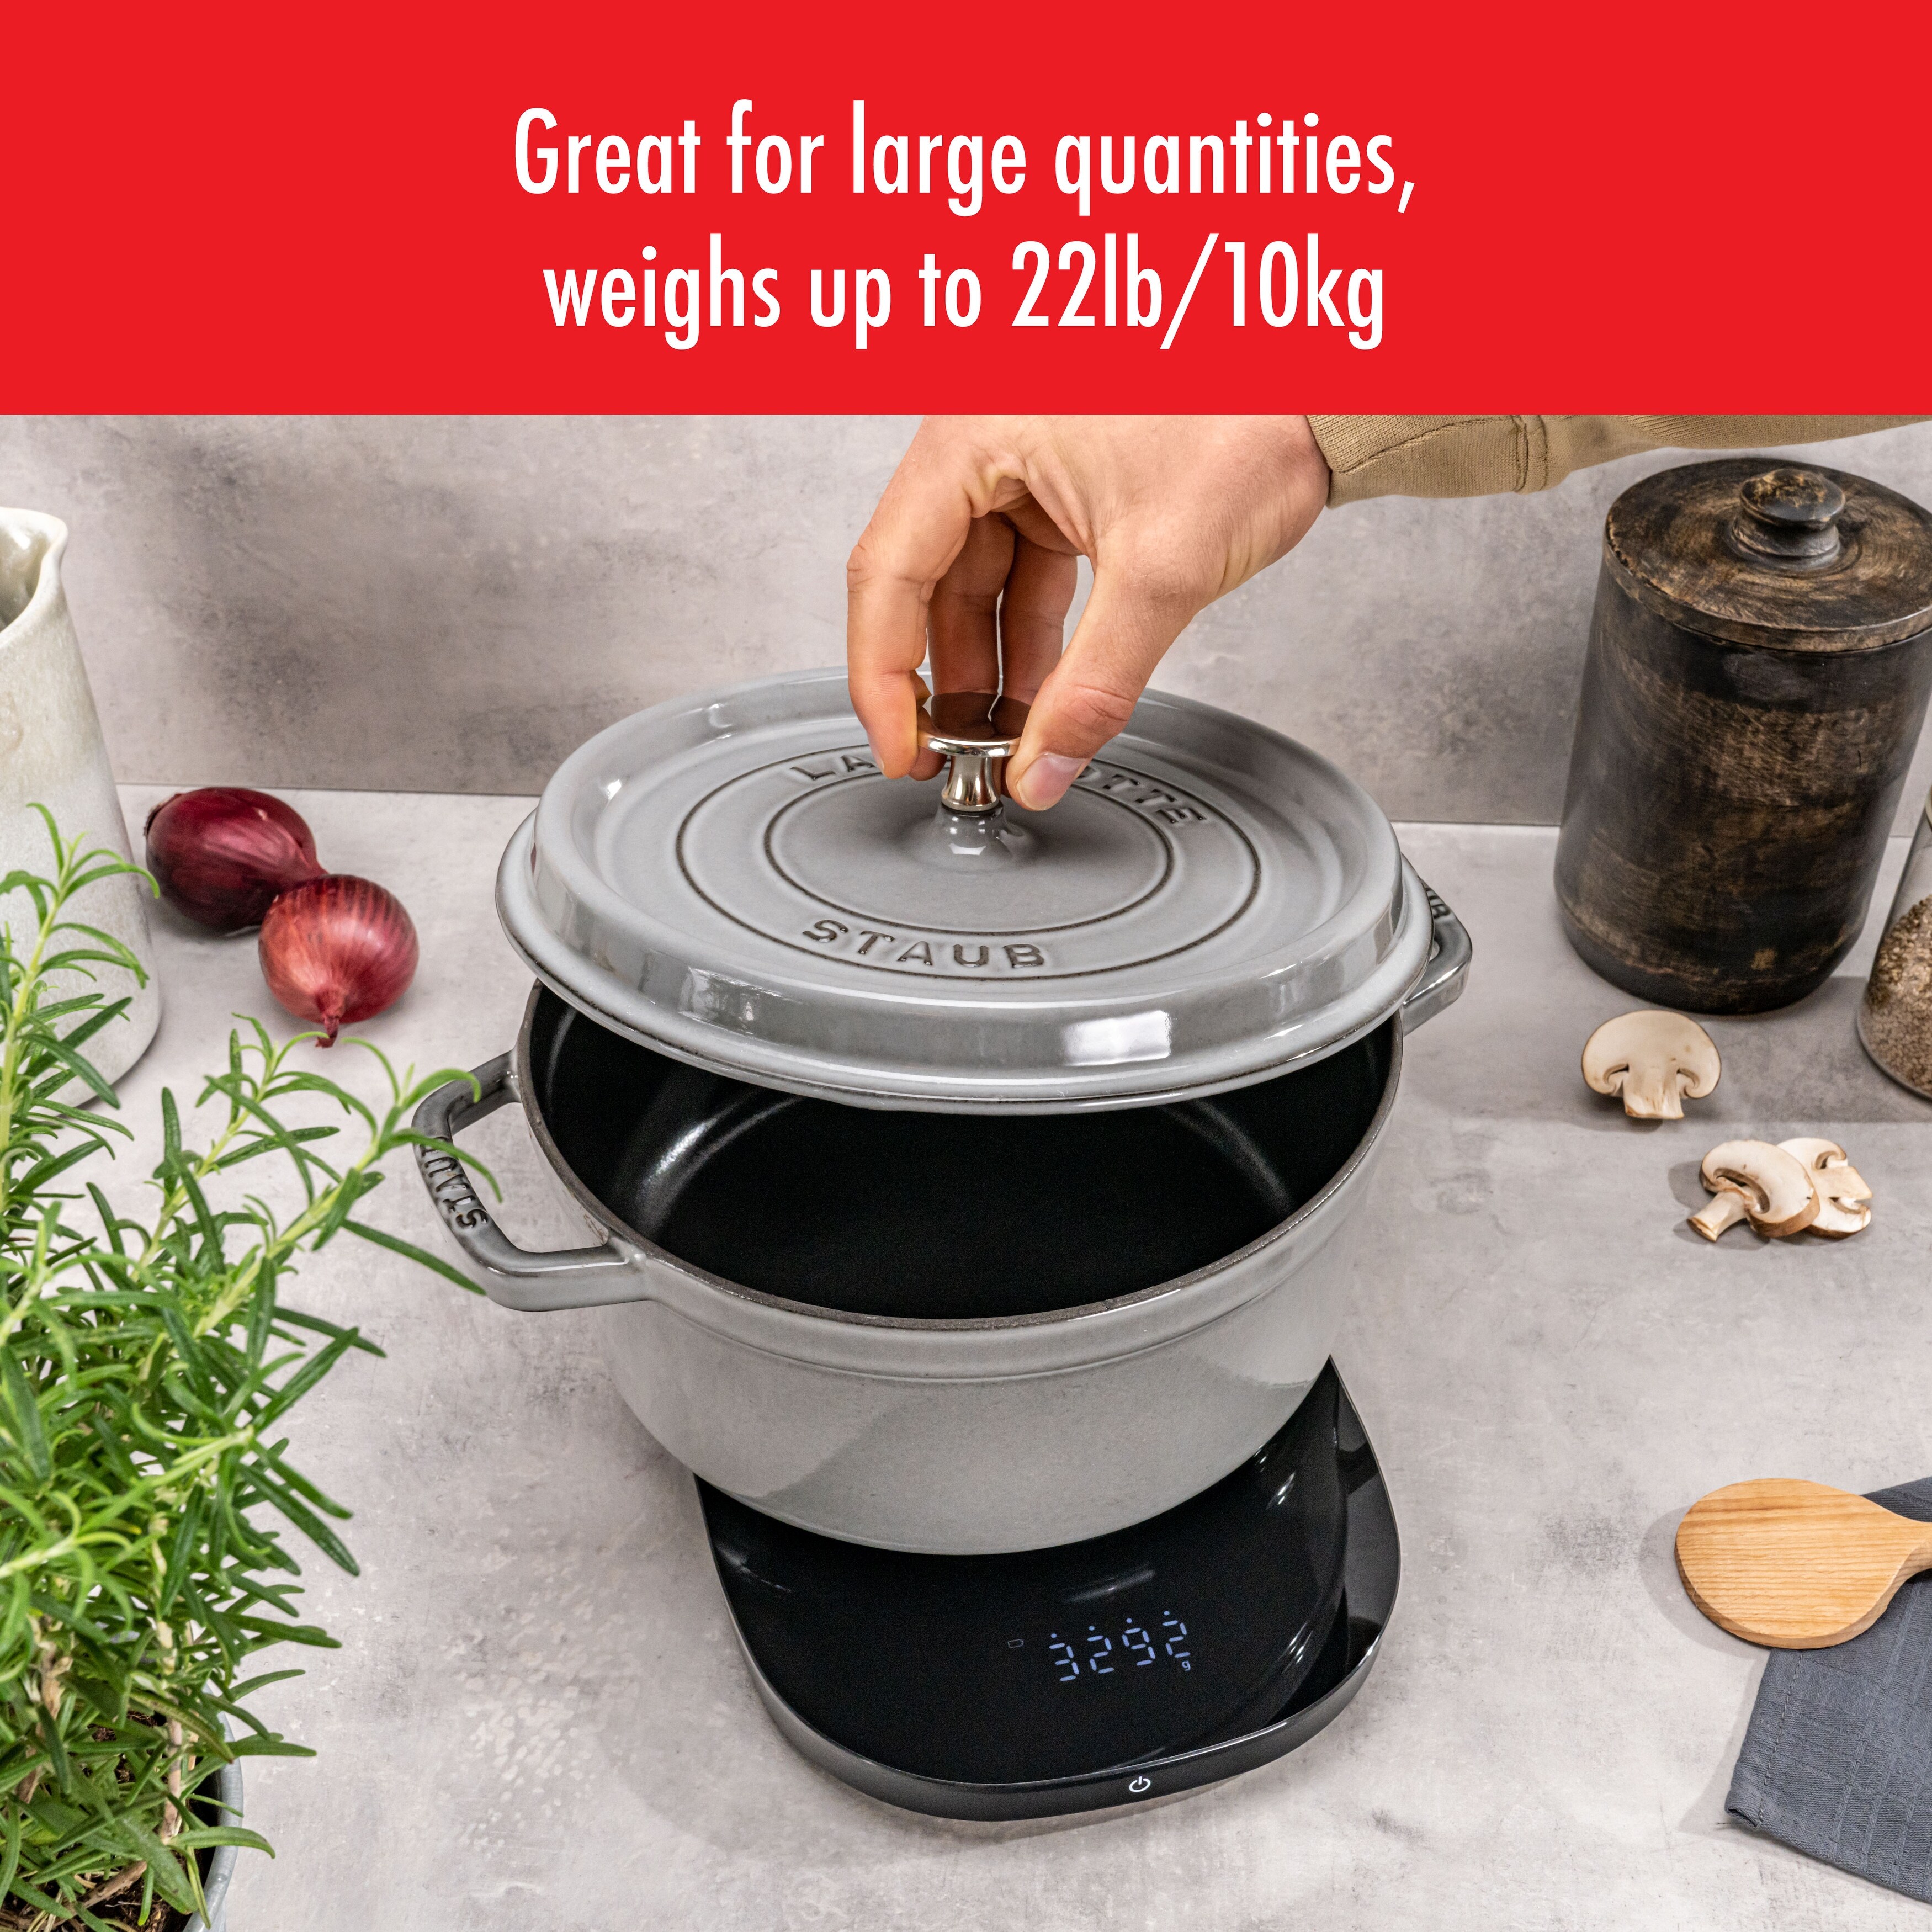 https://ak1.ostkcdn.com/images/products/is/images/direct/1ea2e6a66c6e6381c749f015bda6010c39dad147/ZWILLING-Enfinigy-22lbs-Digital-Food-Power-Scale%2C-Kitchen-Scale.jpg